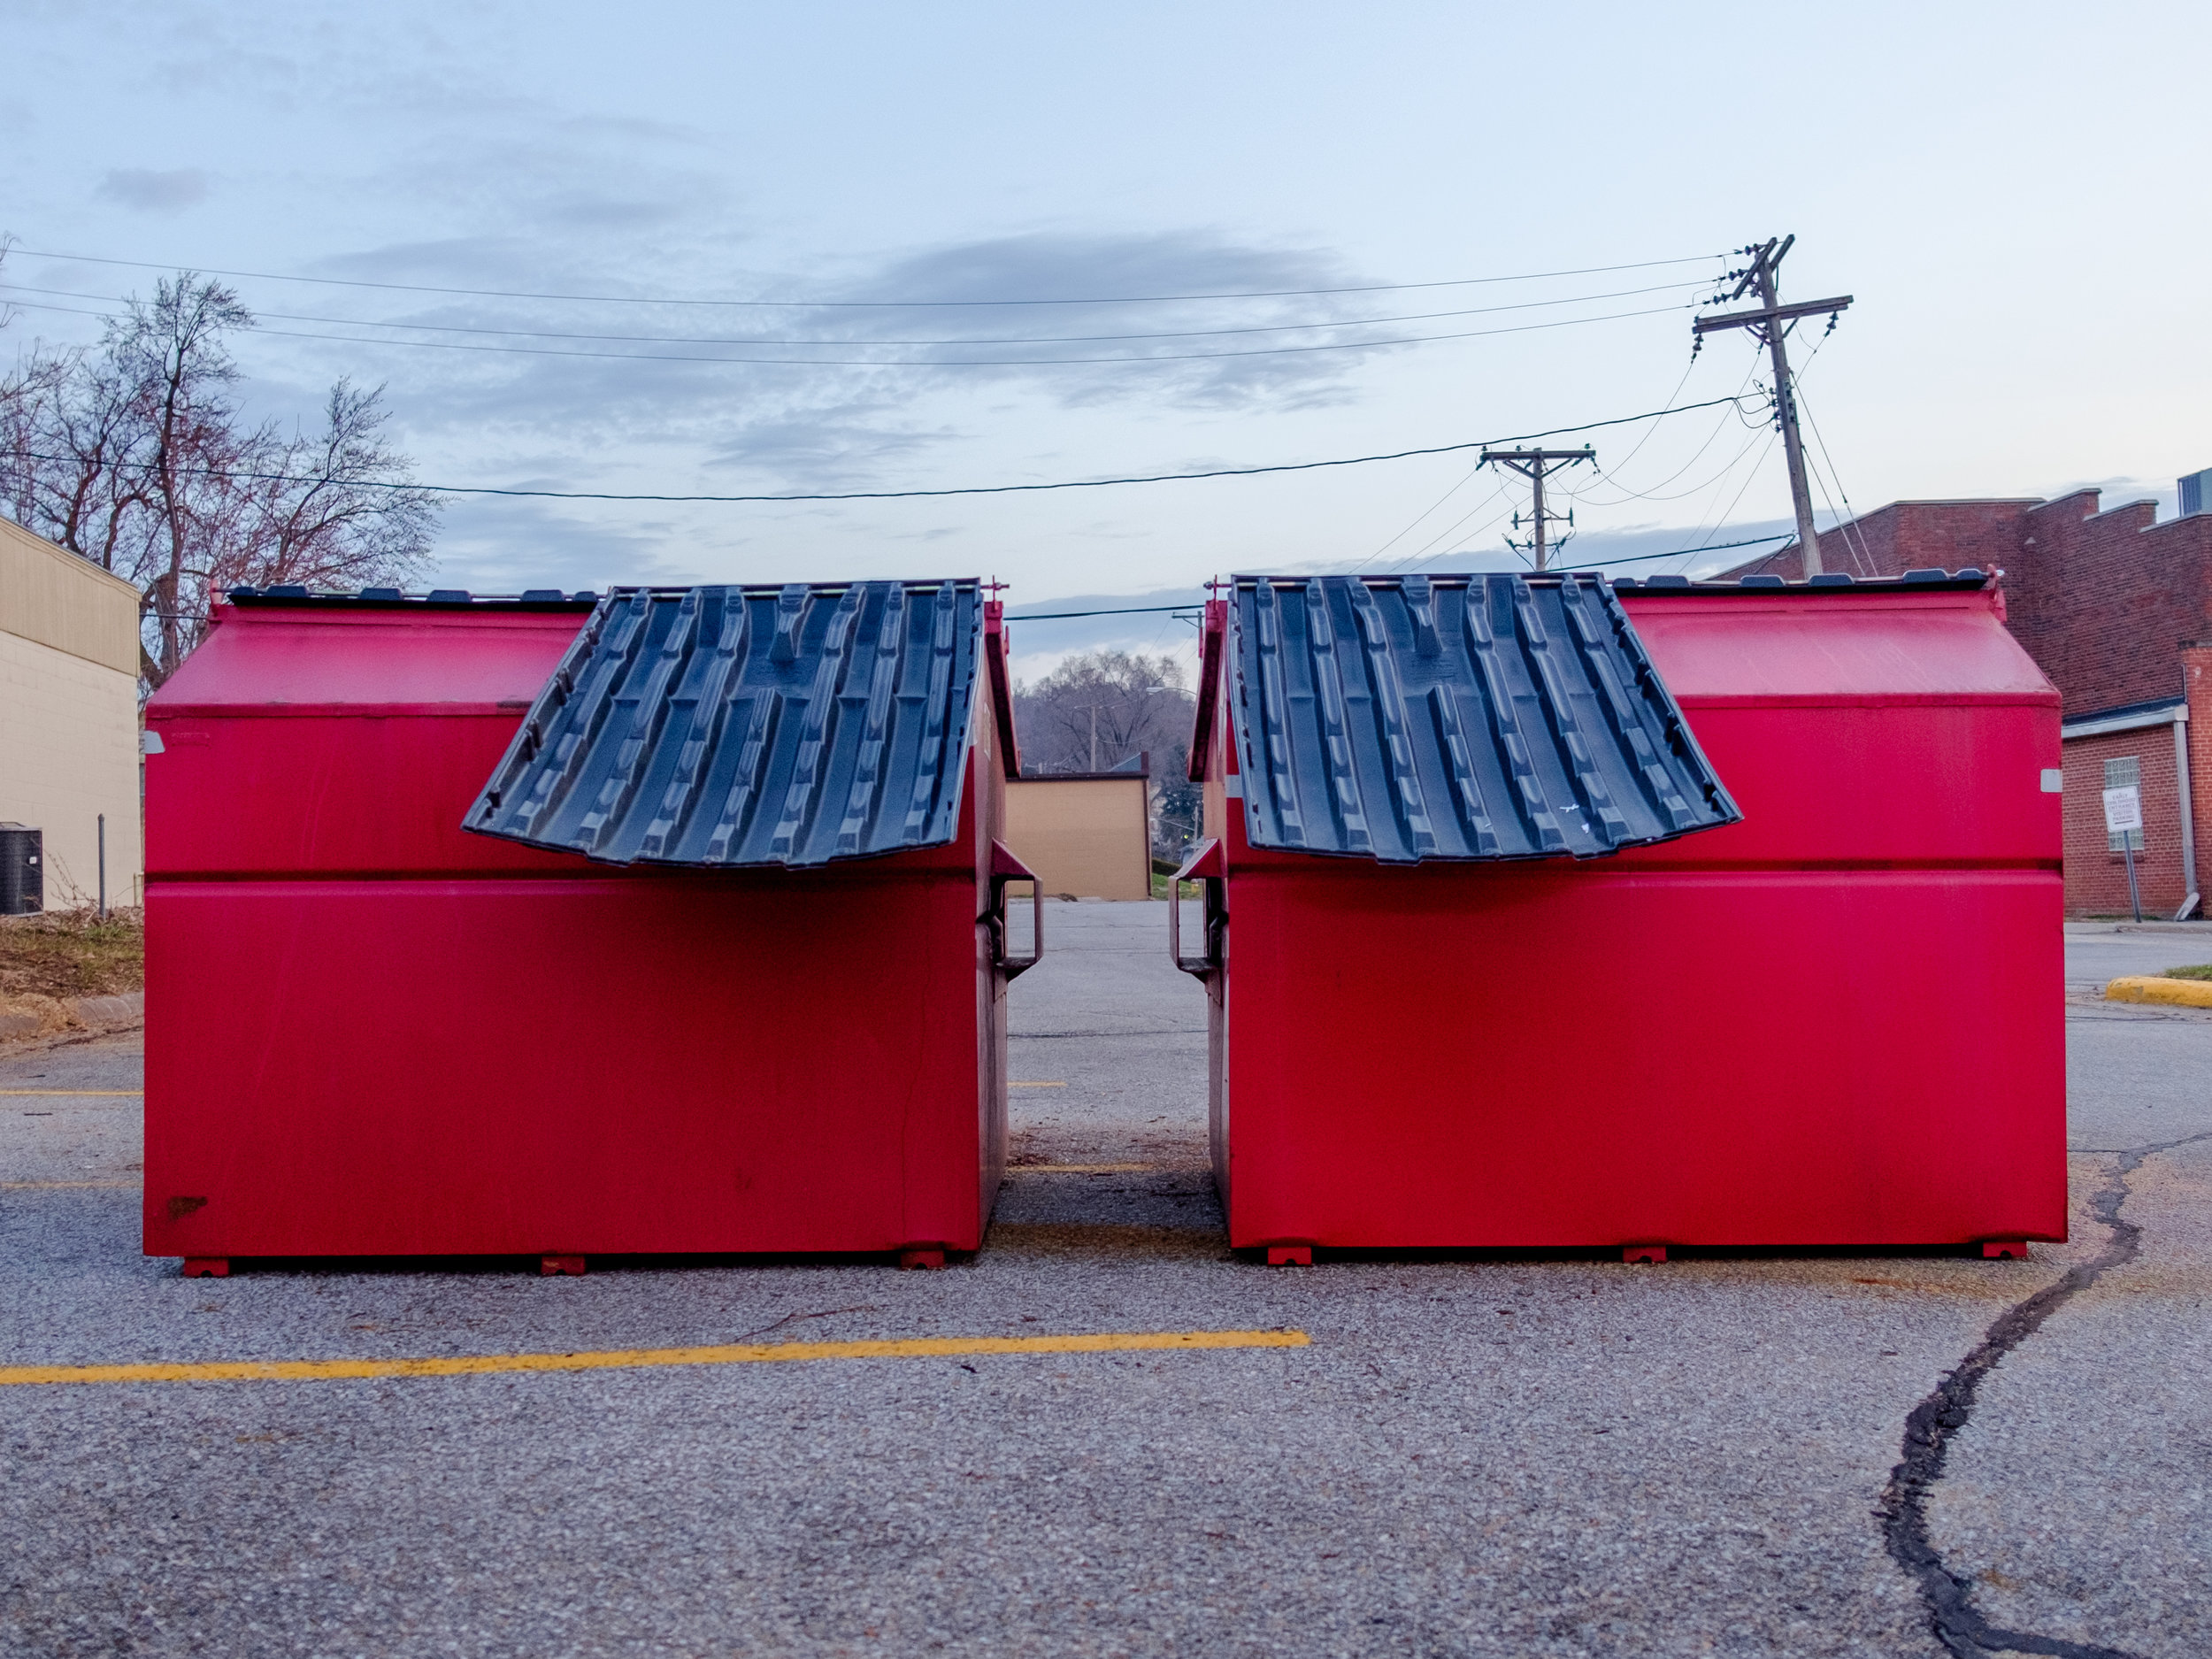 Dumpster Twins in Red